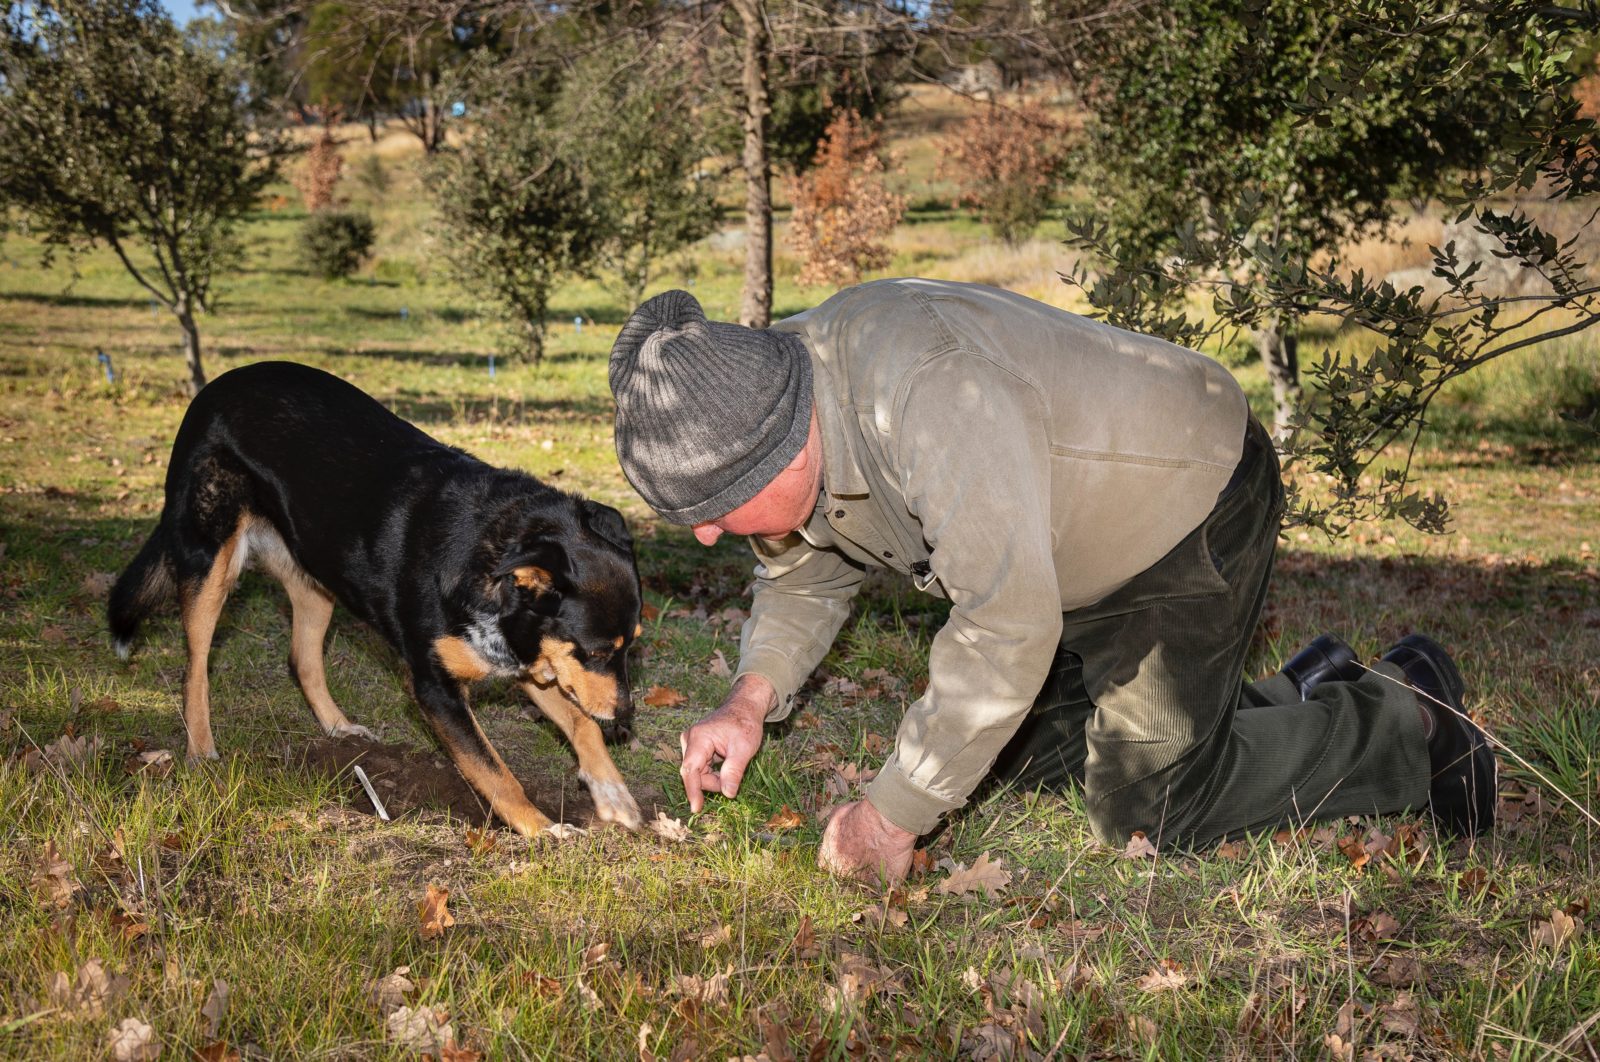 Truffle dog Bella assists Dick in locating a truffle in the soil